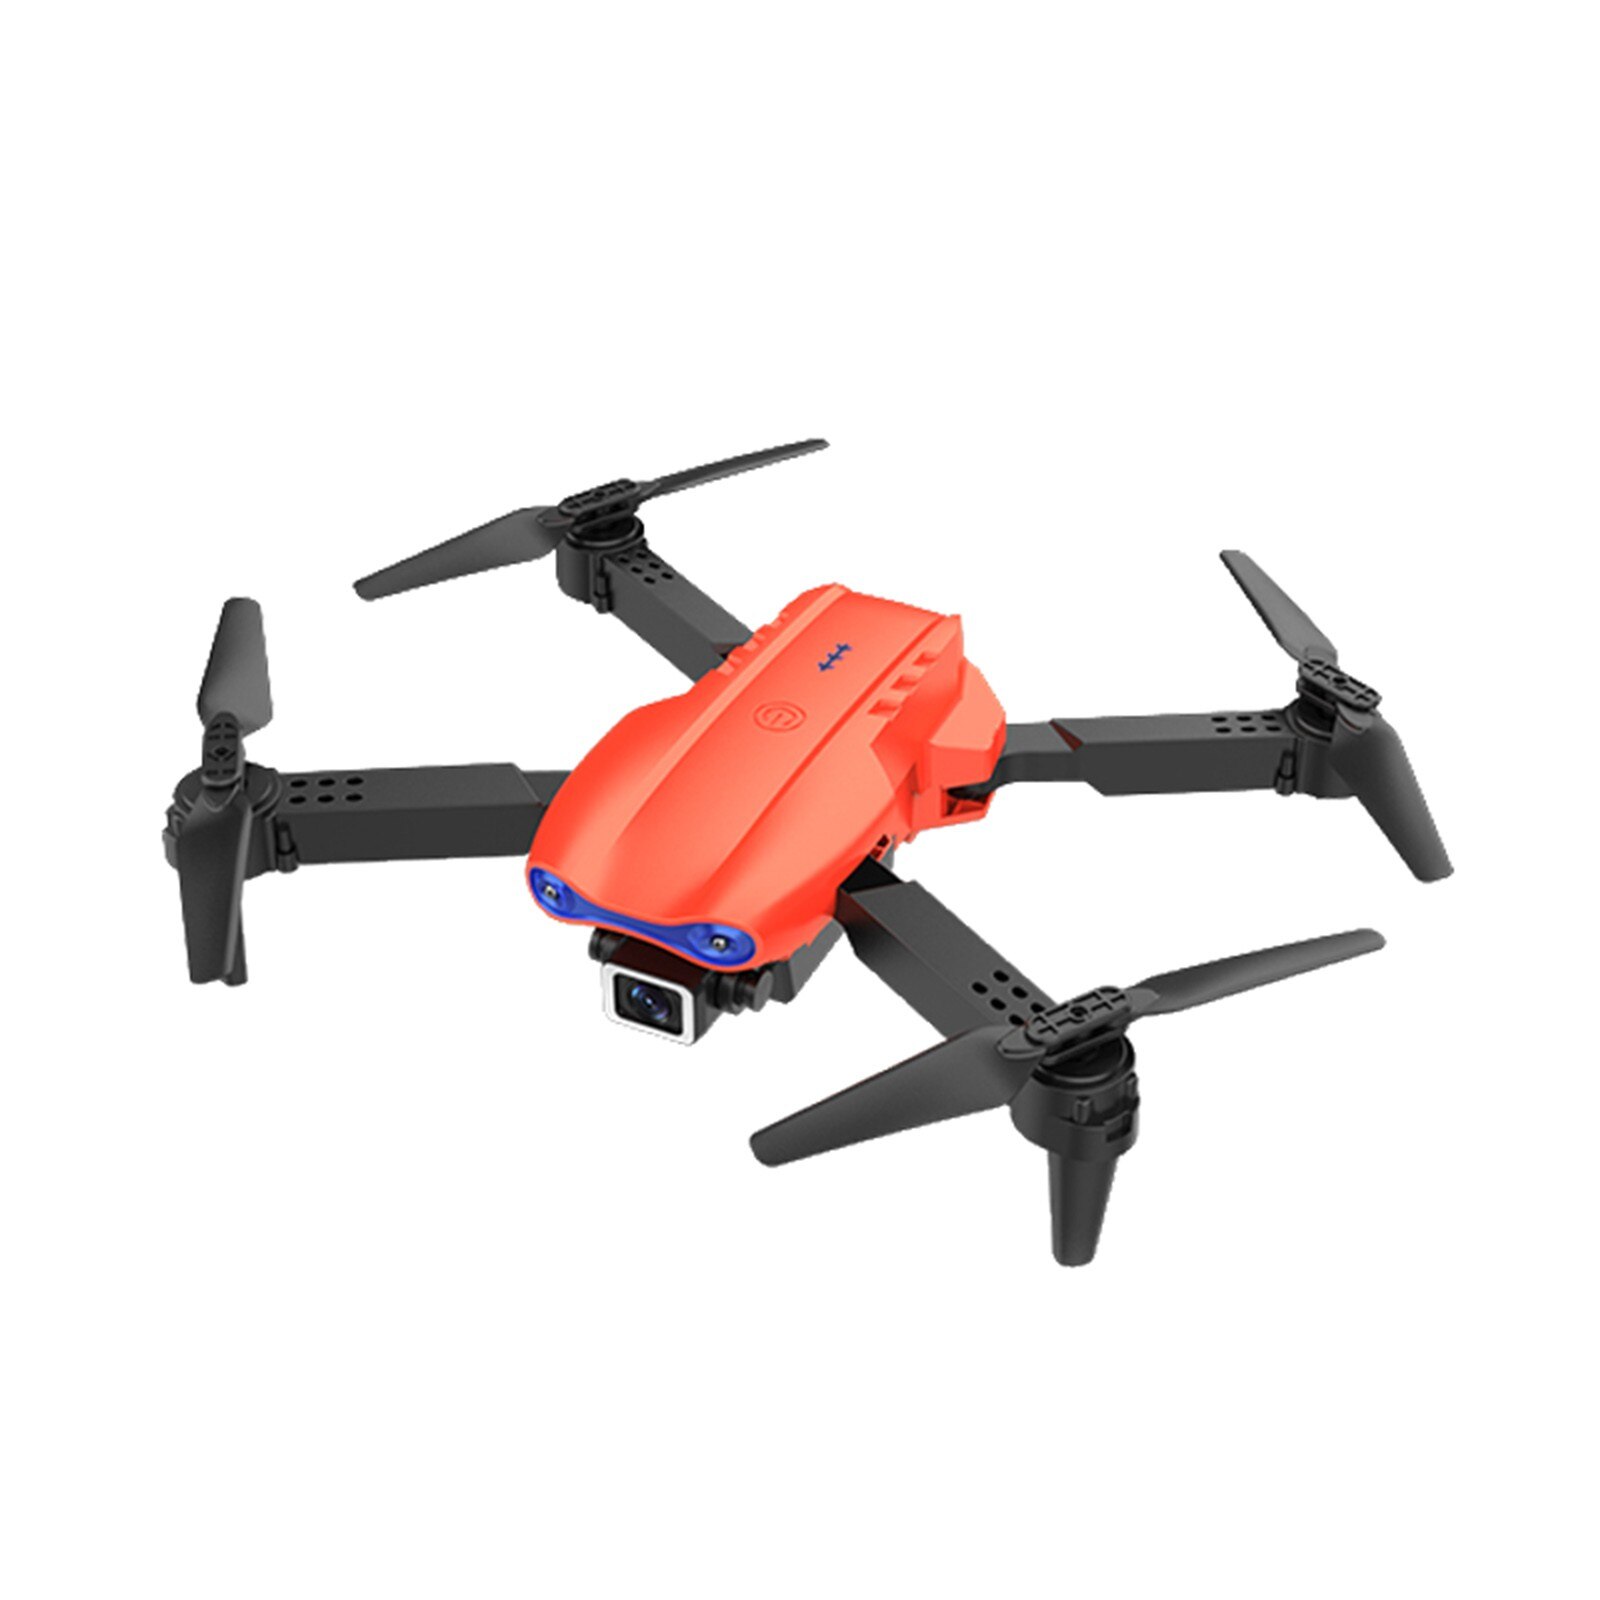 Mini-drone 4k Hd Dual Camera Wifi Fpv Smart Selfie Rc Uav Foldable Helicopter Profesional Photography Quadcopter Rc Dron Toys